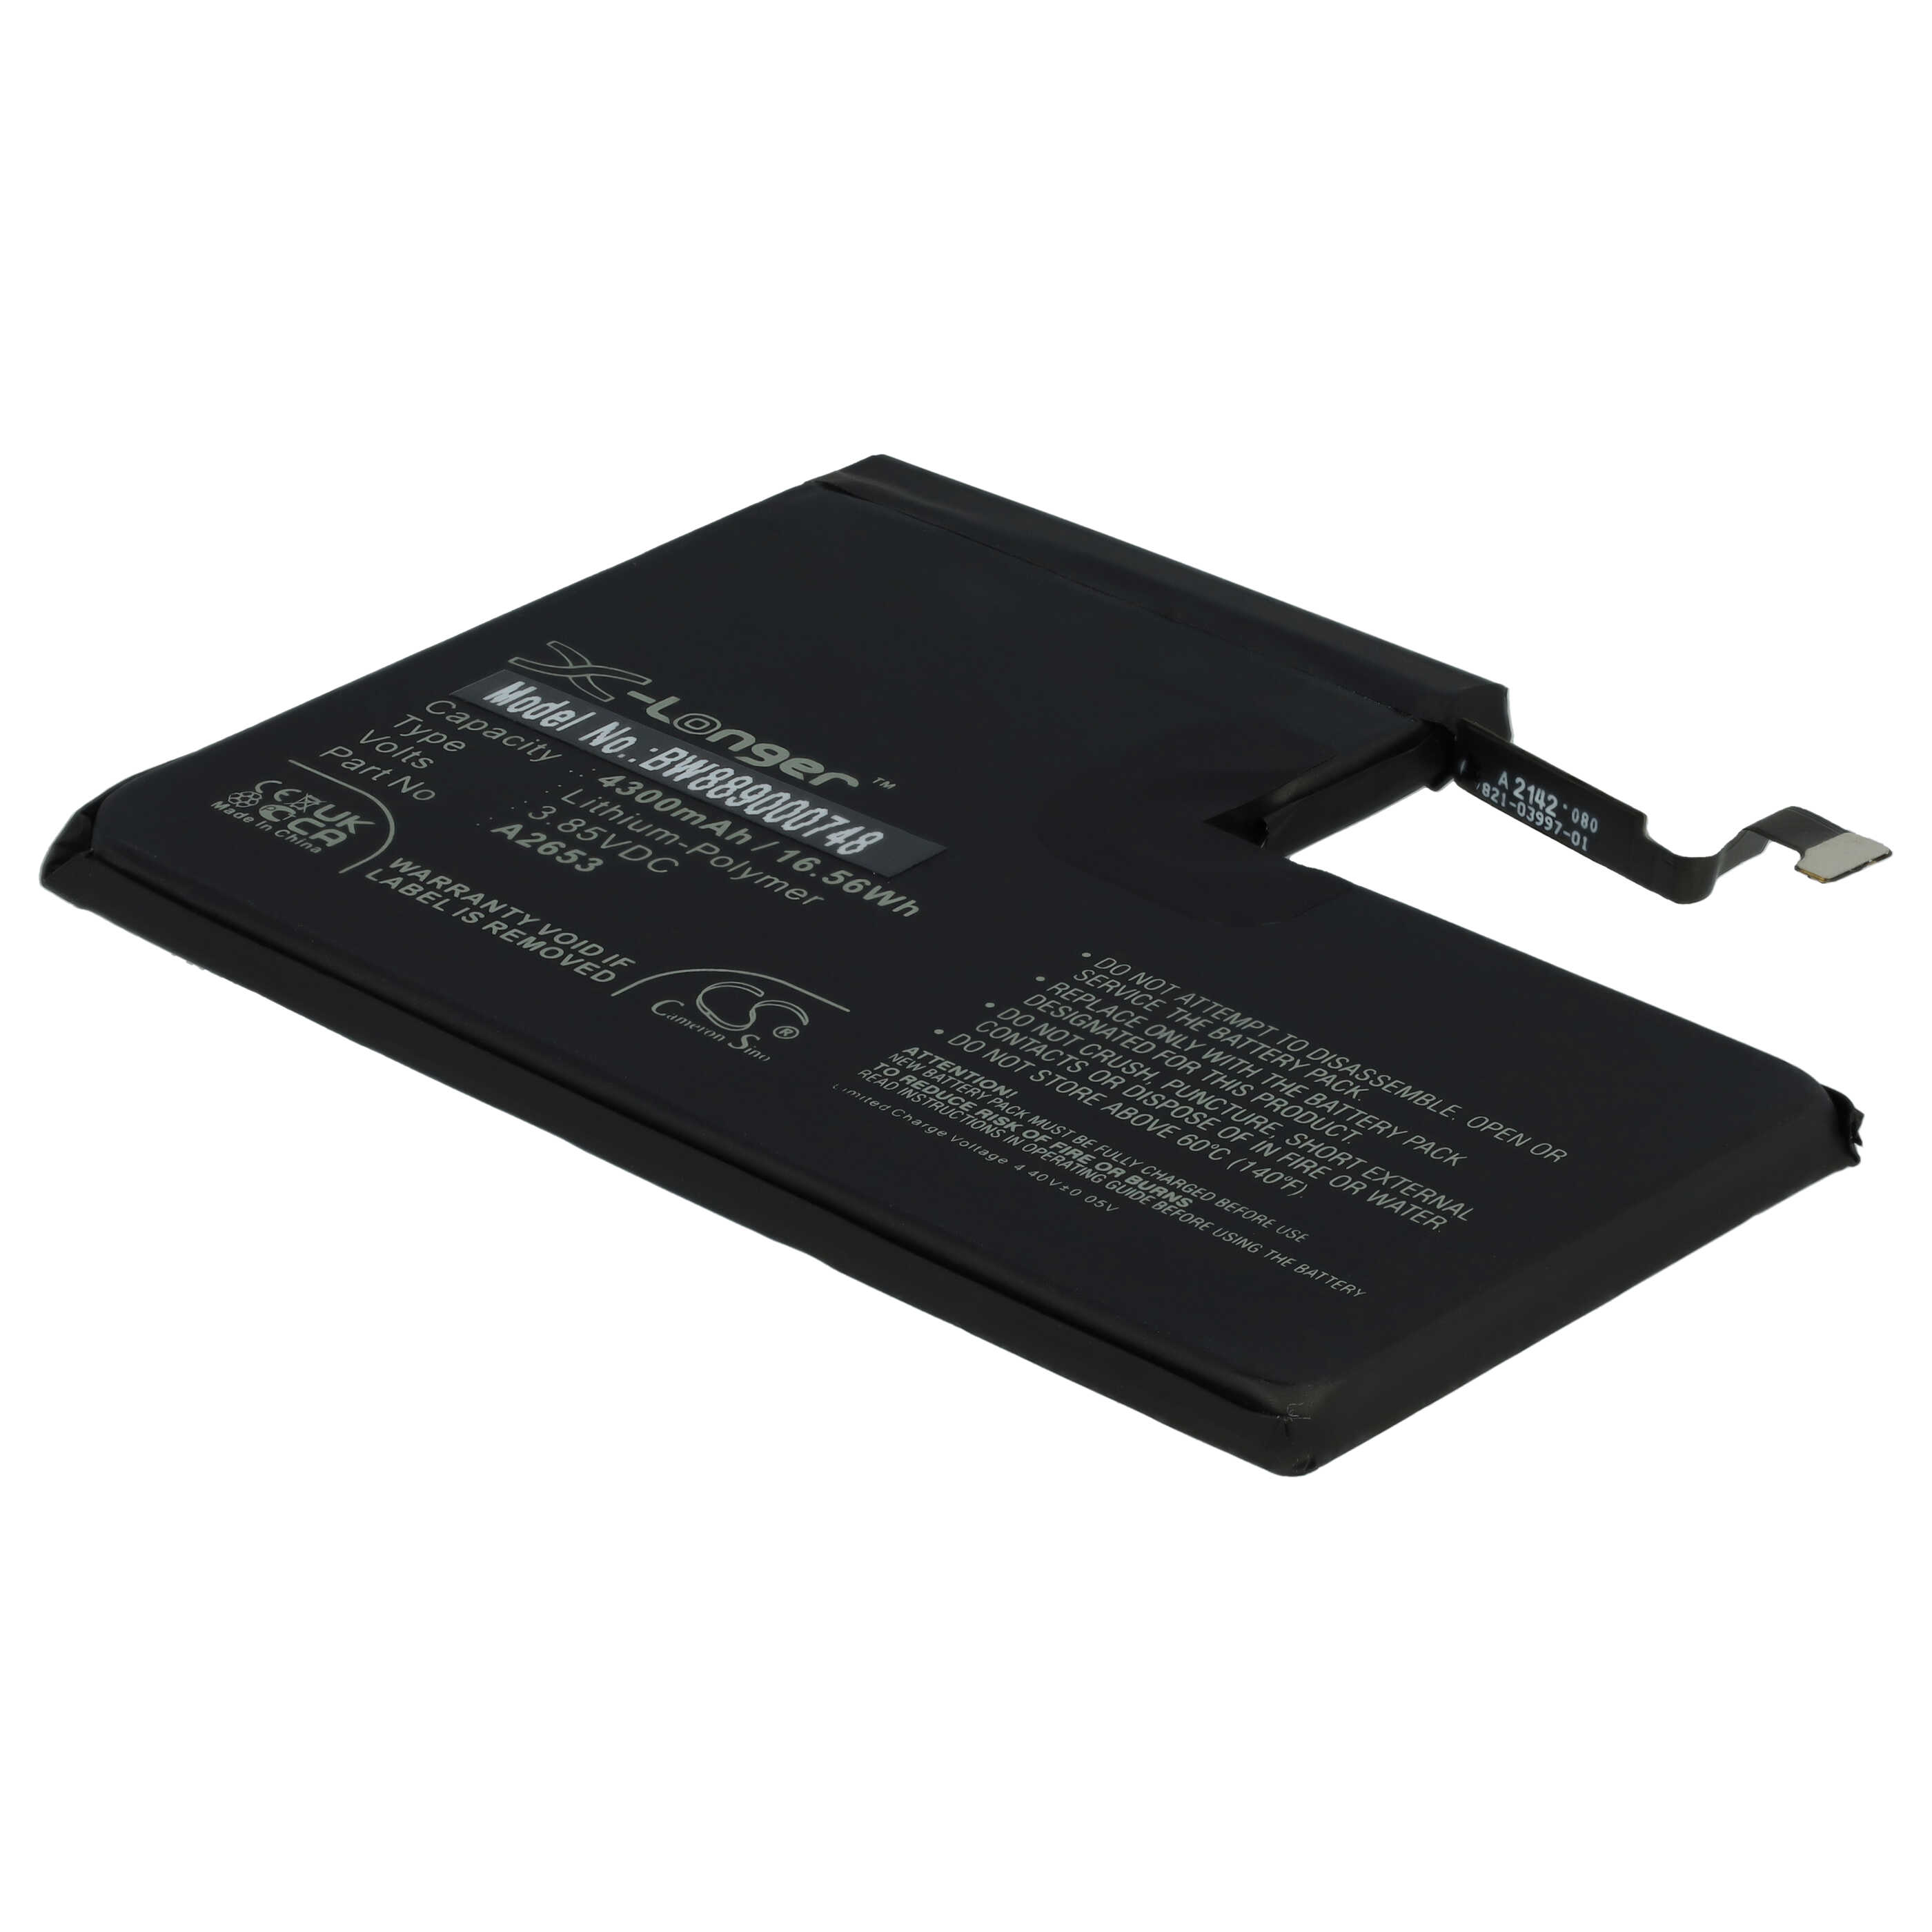 Mobile Phone Battery Replacement for Apple A2653 - 4300mAh 3.85V Li-polymer